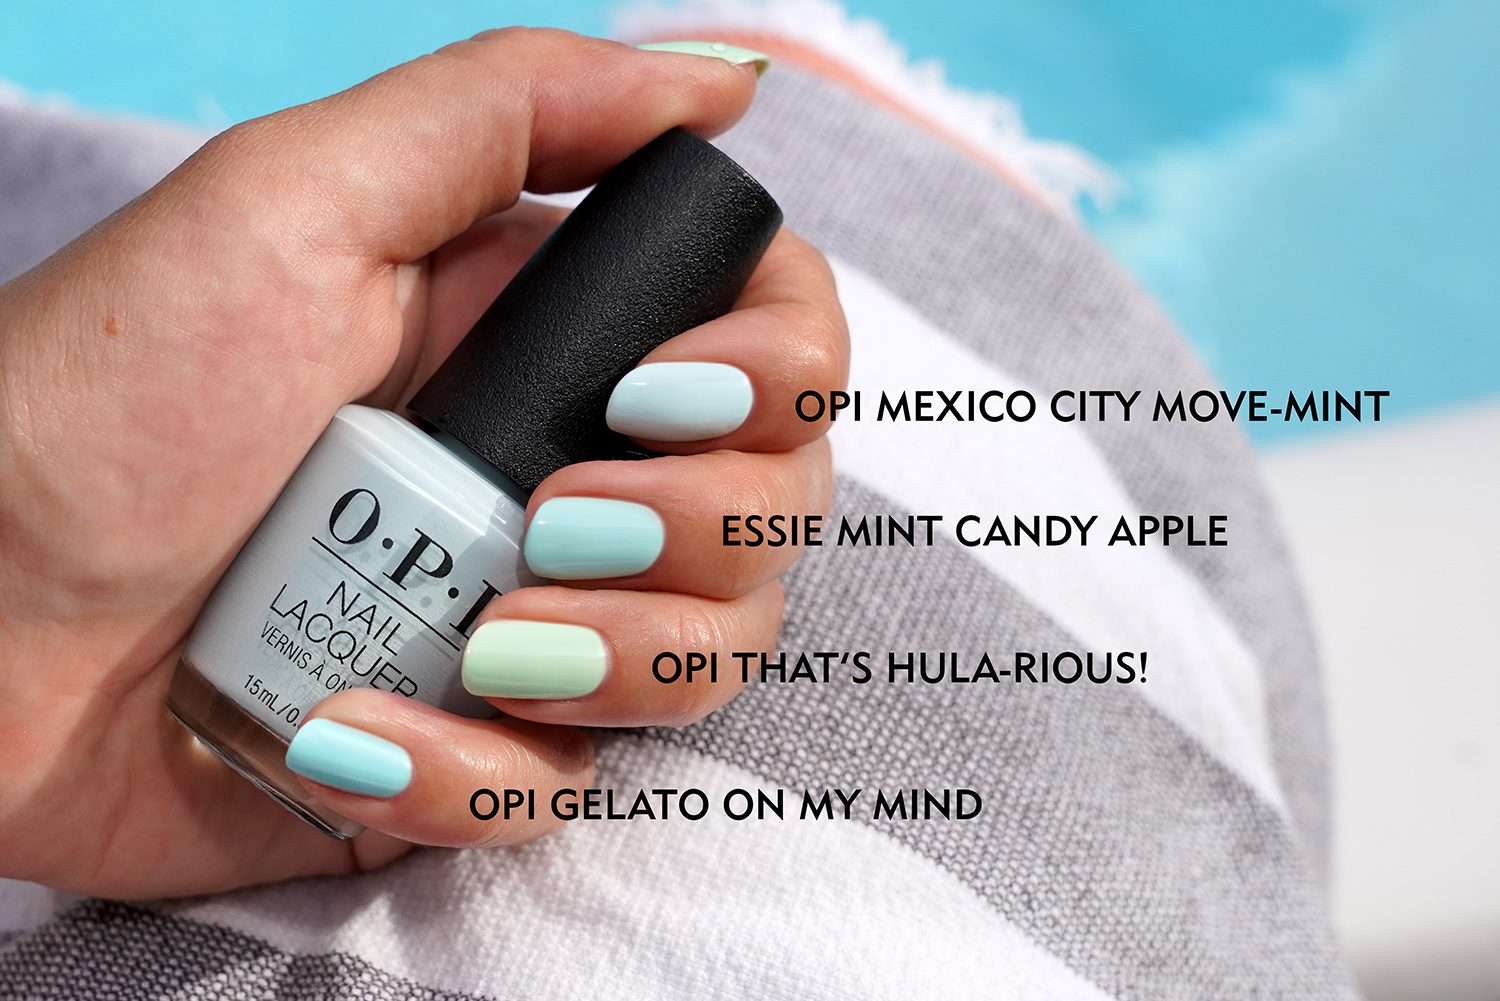 Fun Nail Polish Colors to Try This Summer - The Beauty Look Book